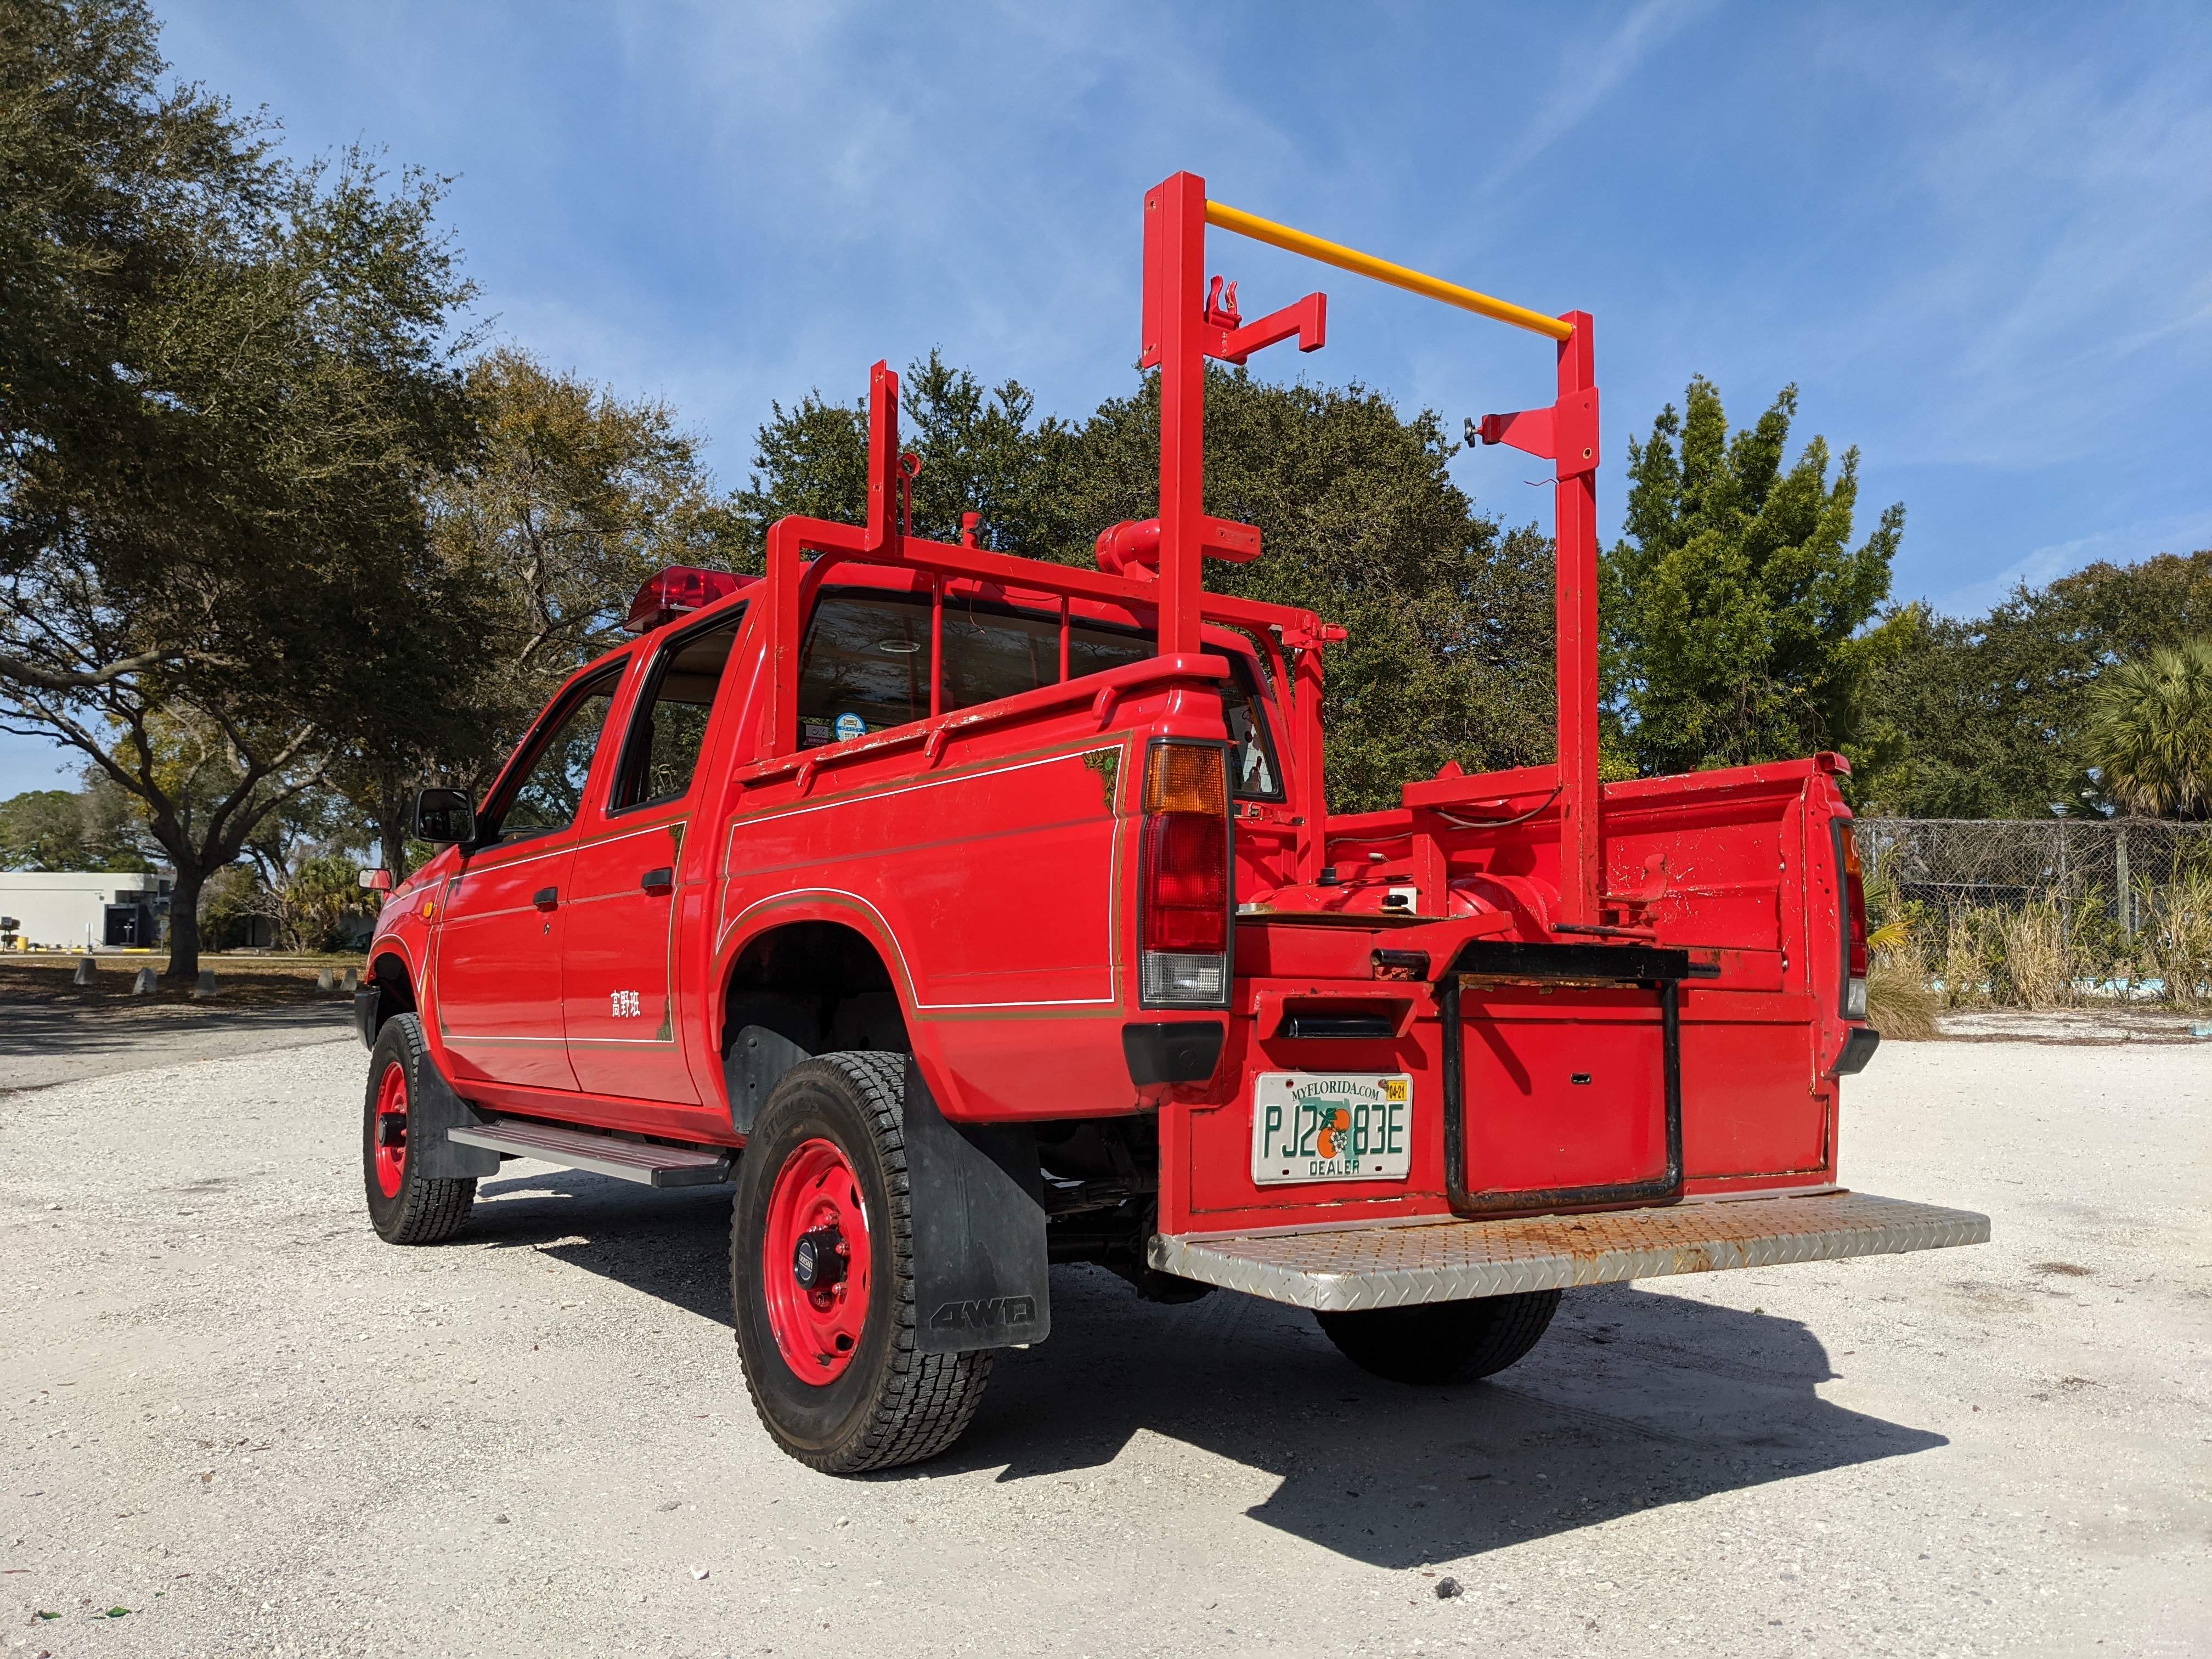 1992 Nissan Datsun Pickup QMD21-424254 Fire Truck - Limerence 